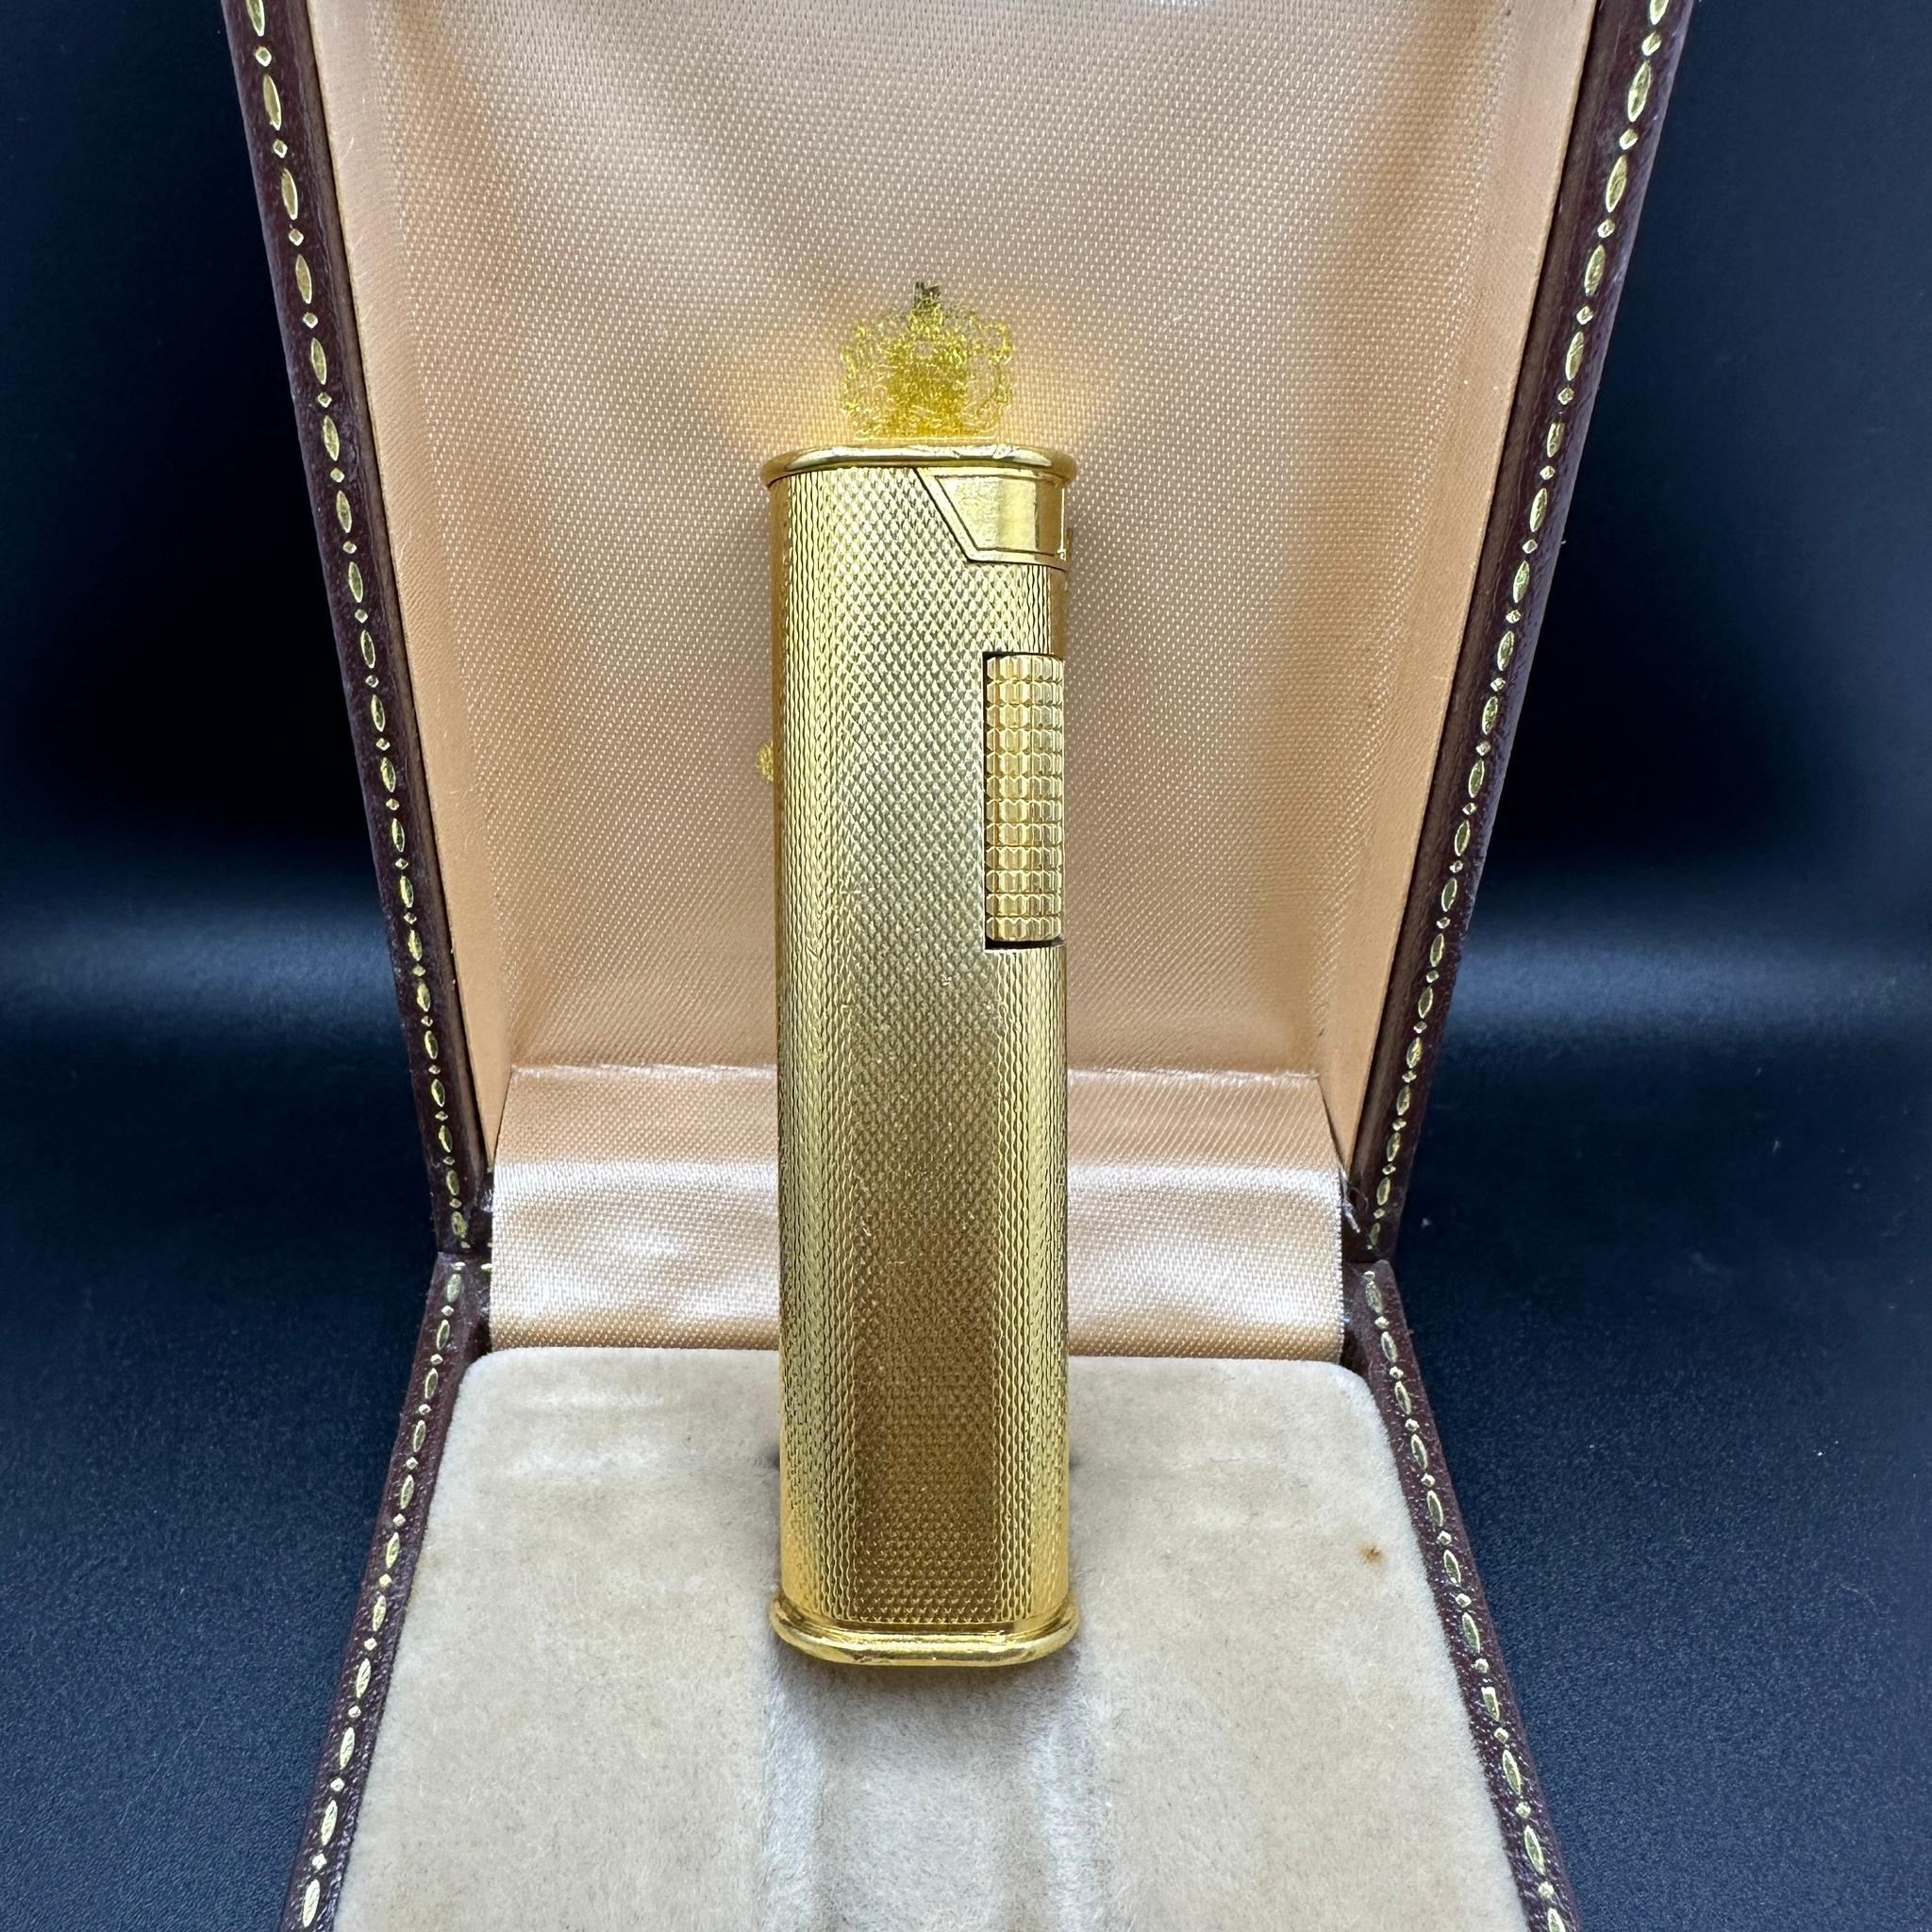 Vintage Dunhill gold plated Skinny lighter 
This lighter was made in 1960 s to 1970 s as an evening lighter, it as a long slim silhouette.
Perfect pit for you inside your jacket pocket and it is great to handle. 
Retro, fantastic condition, as good